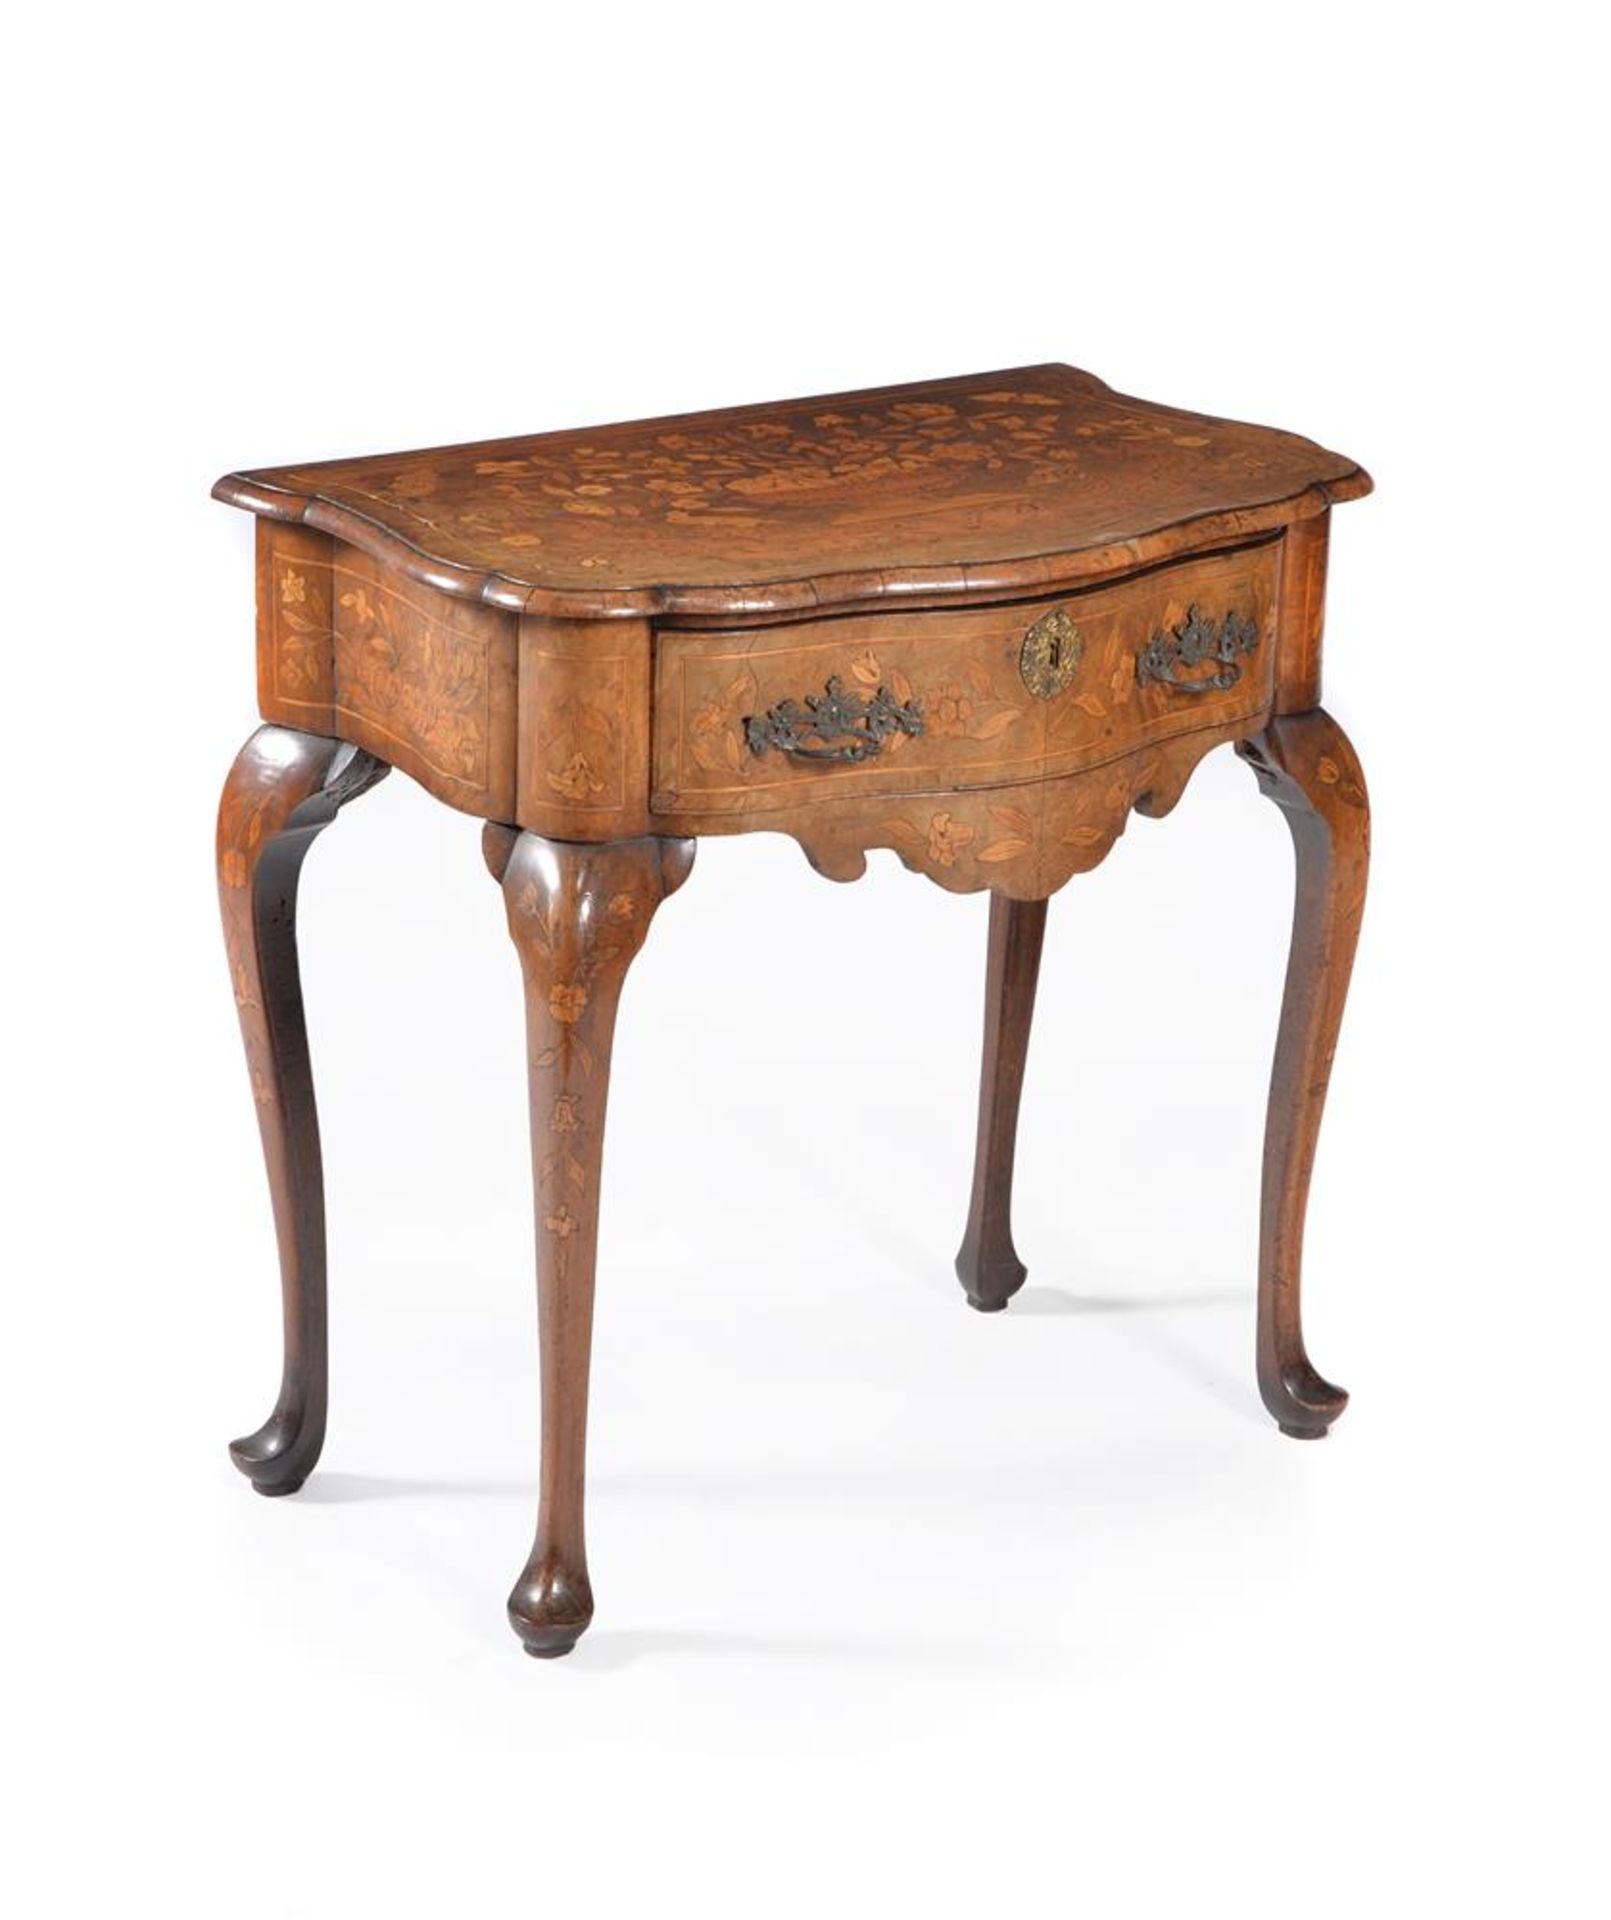 A DUTCH BURR WALNUT AND MARQUETRY SIDE TABLE - Image 2 of 3